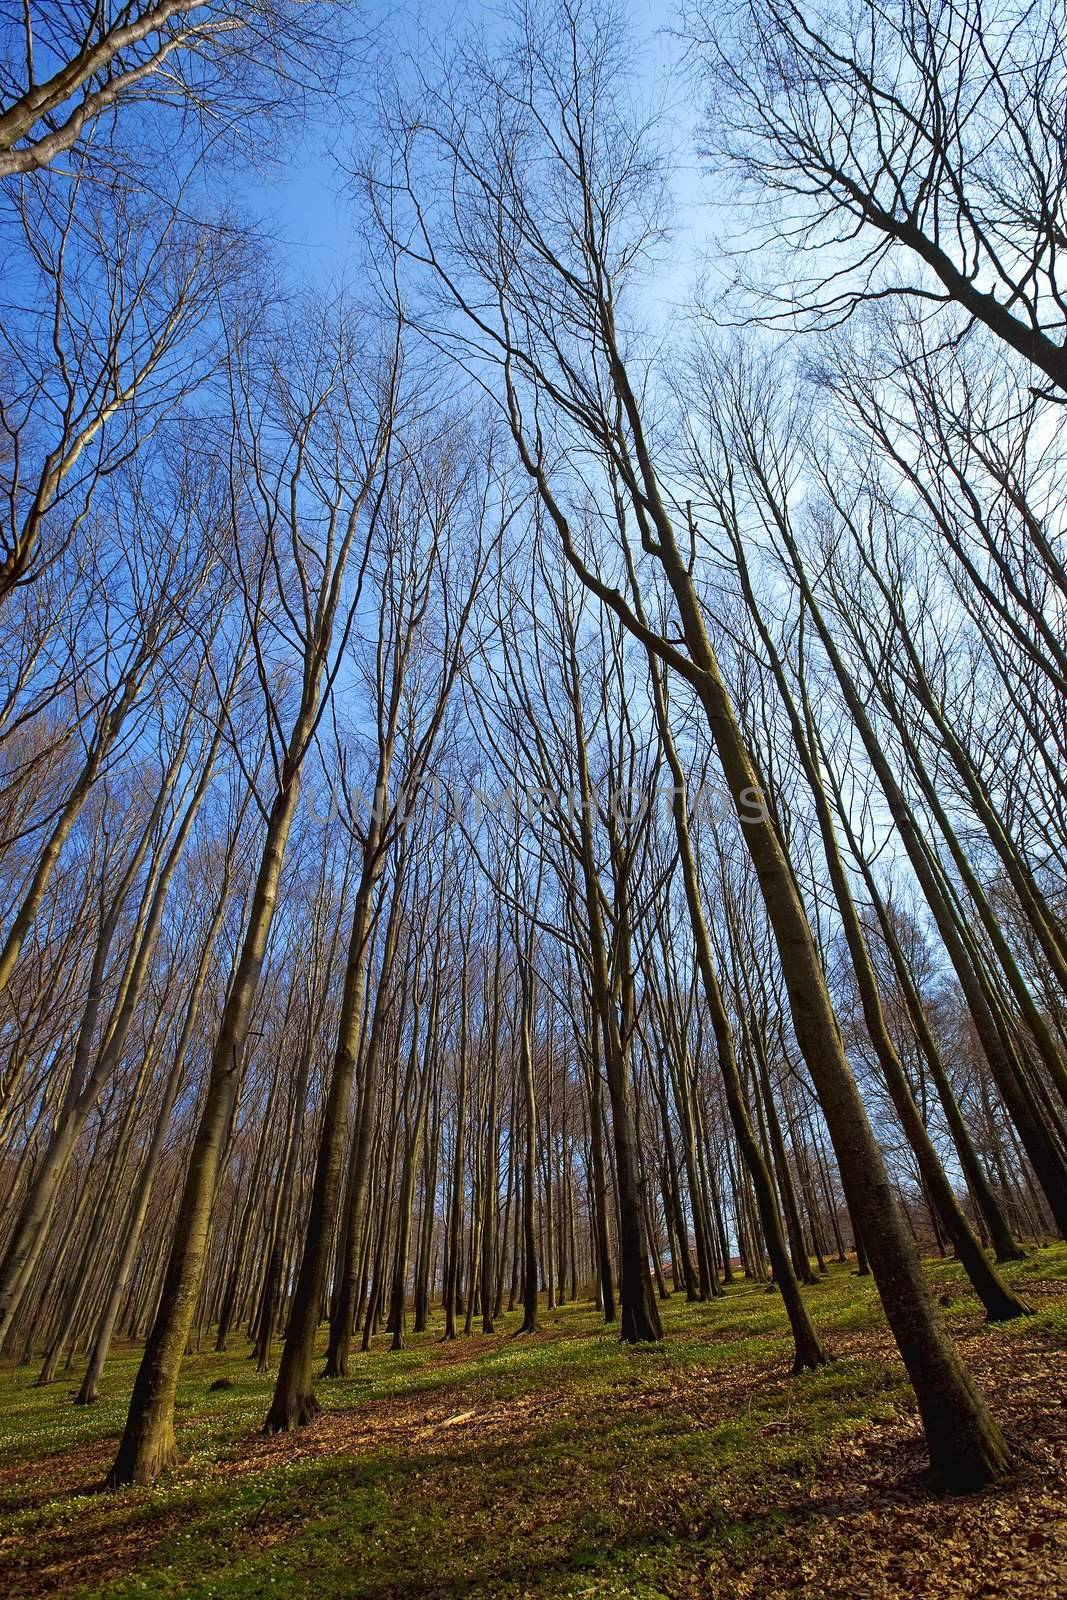 A beech forest in the spring with anemone nemorosas